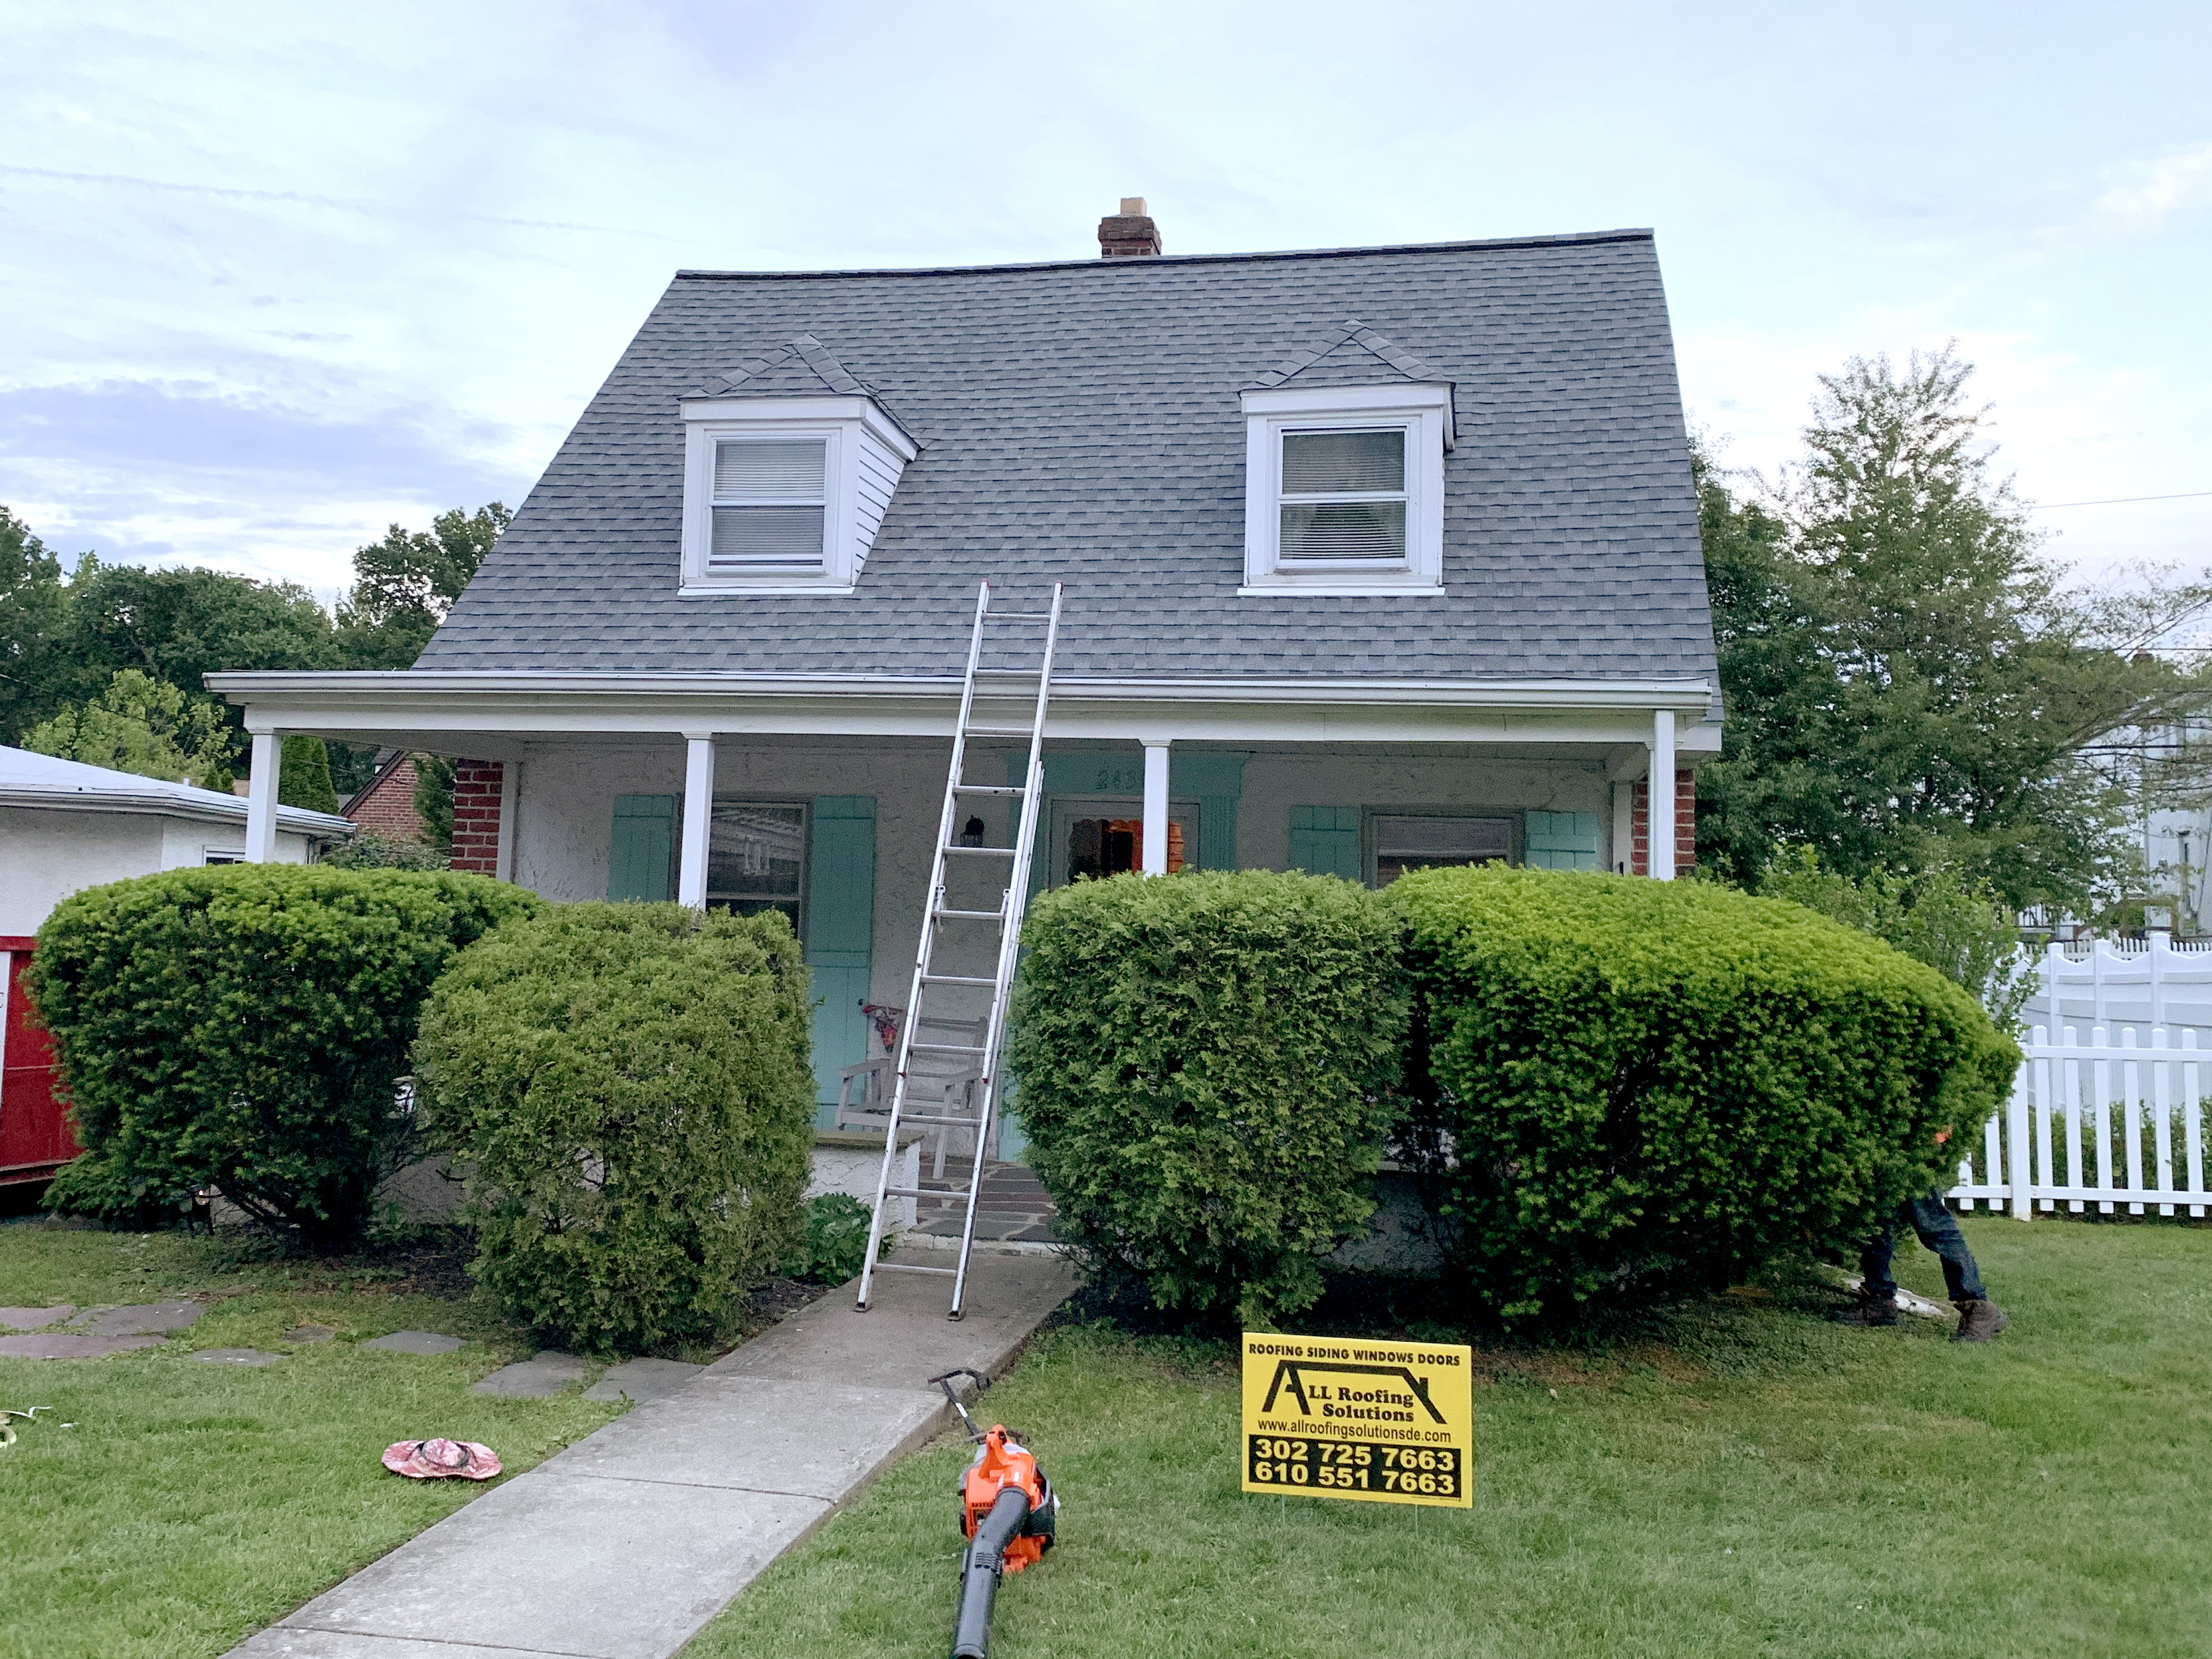 GAF HD Shingles & Liberty Flat Roof Replacement, Clifton Heights PA 19018 - After